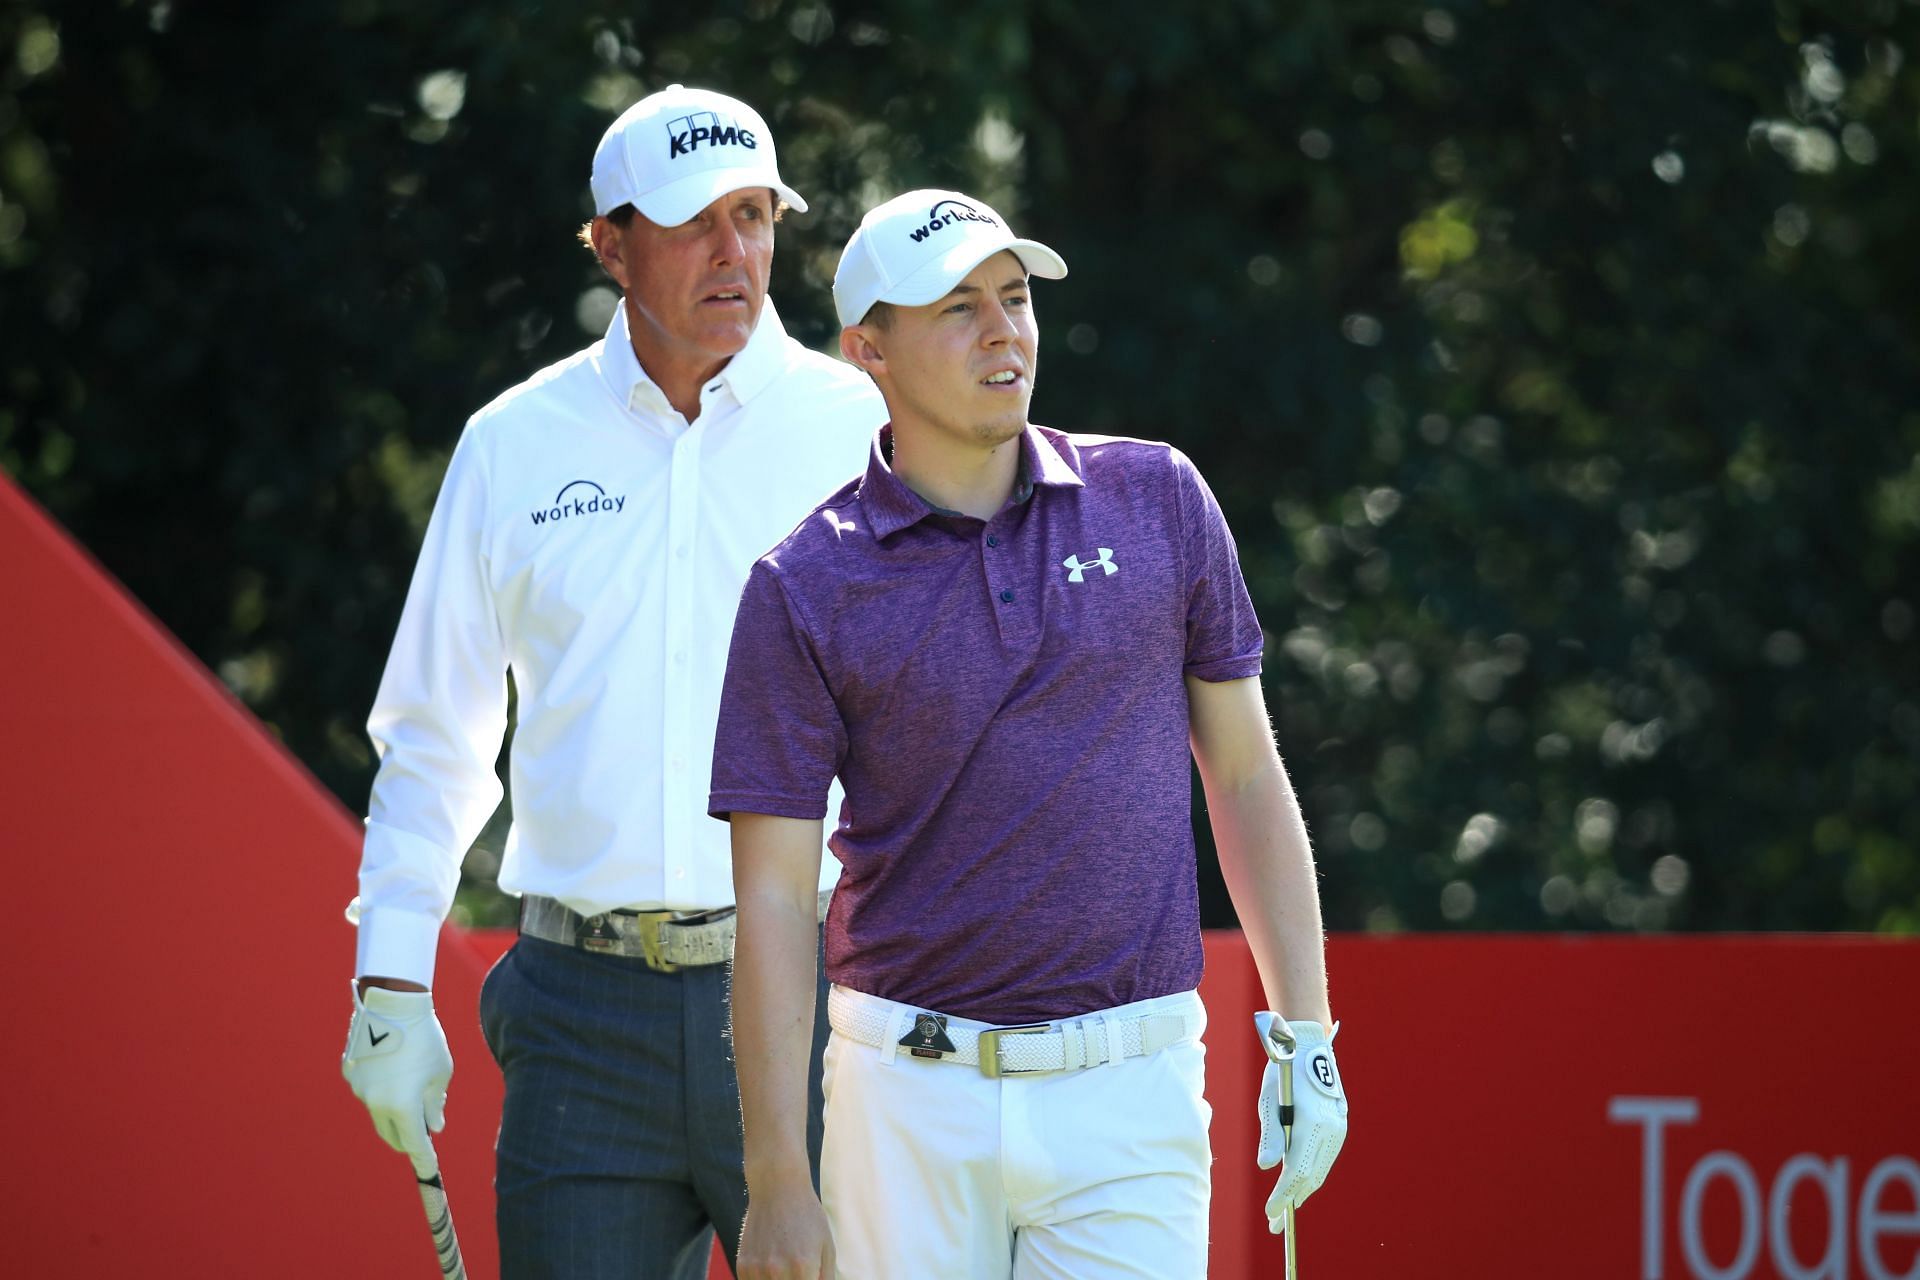 Phil Mickelson and Matt Fitzpatrick at the WGC HSBC Champions (Image via Getty).